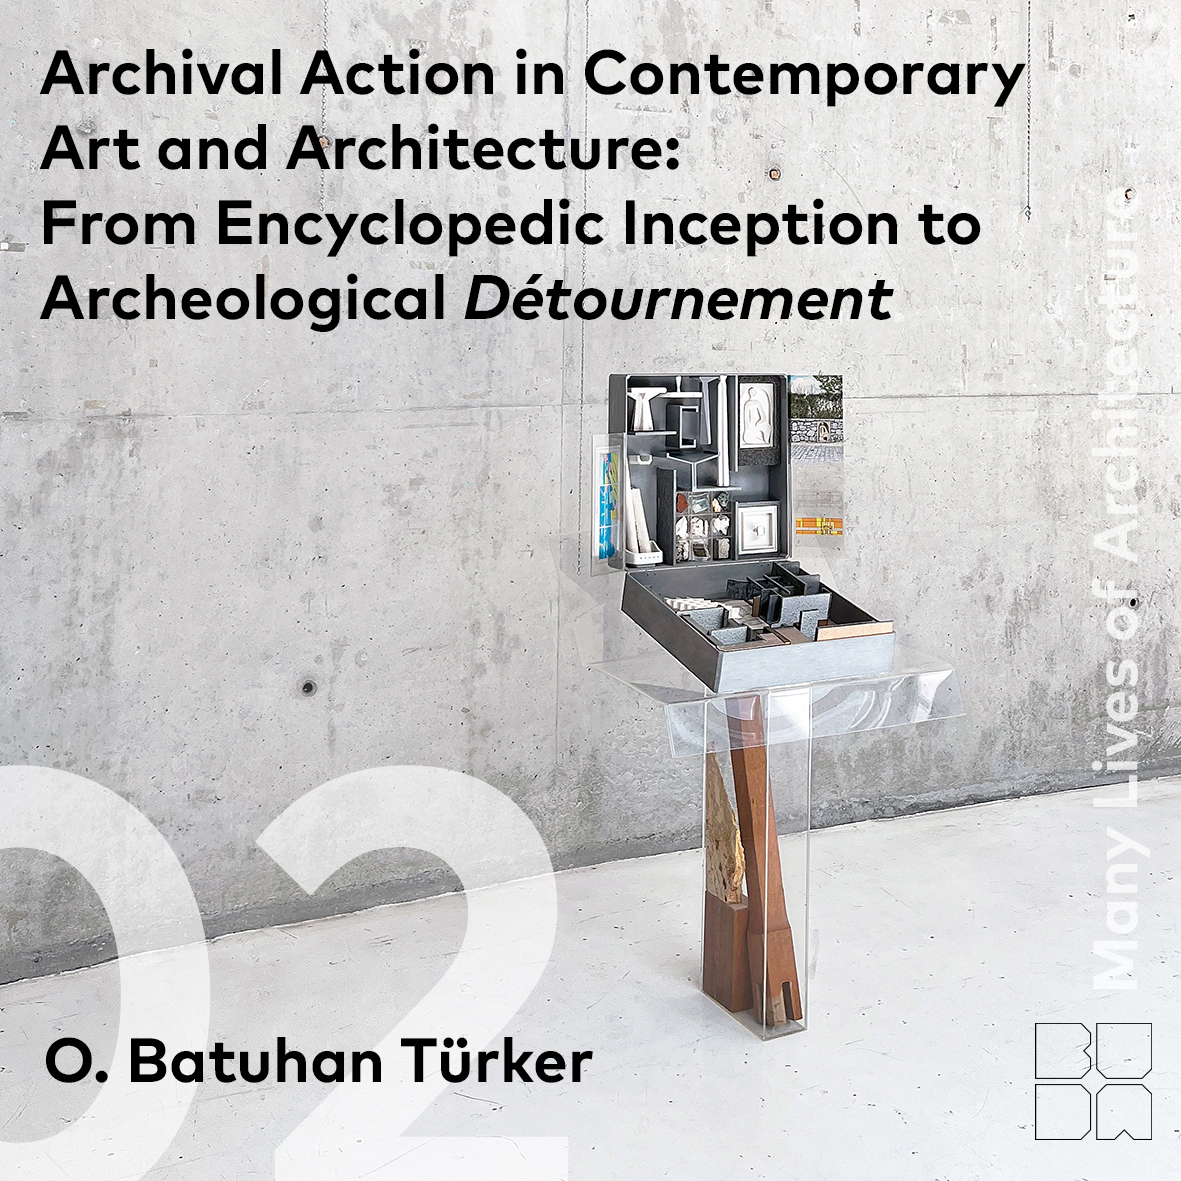 Archival Action in Contemporary Art and Architecture: From Encyclopedic Inception to Archeological Détournement *